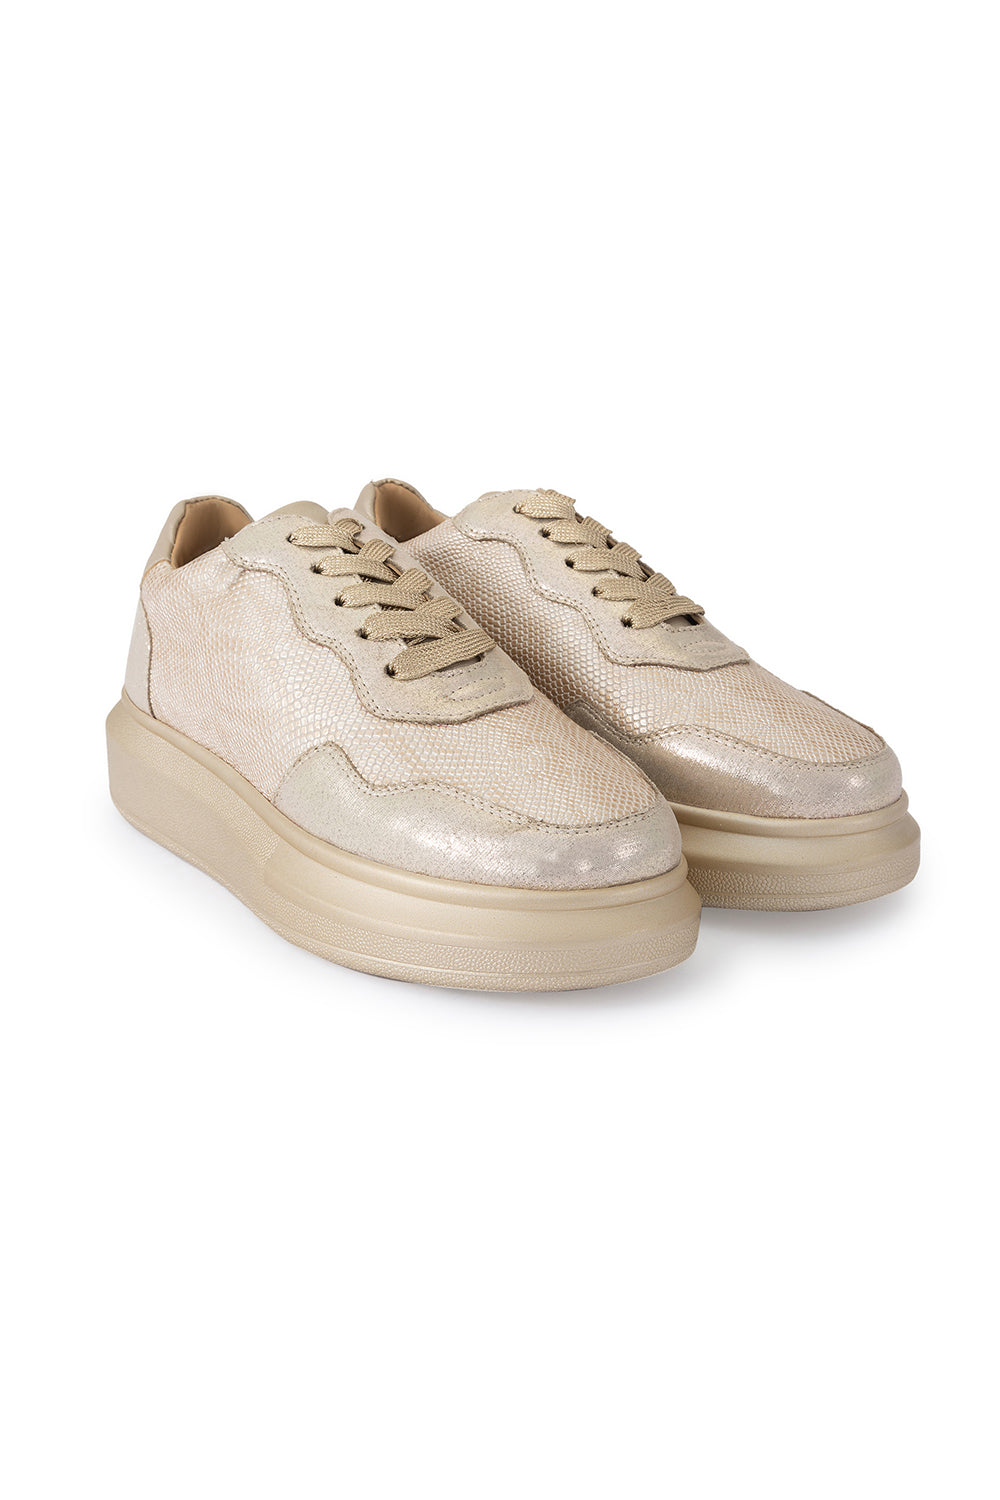 Champagne Gold Groove Classic Wedge Sneakers